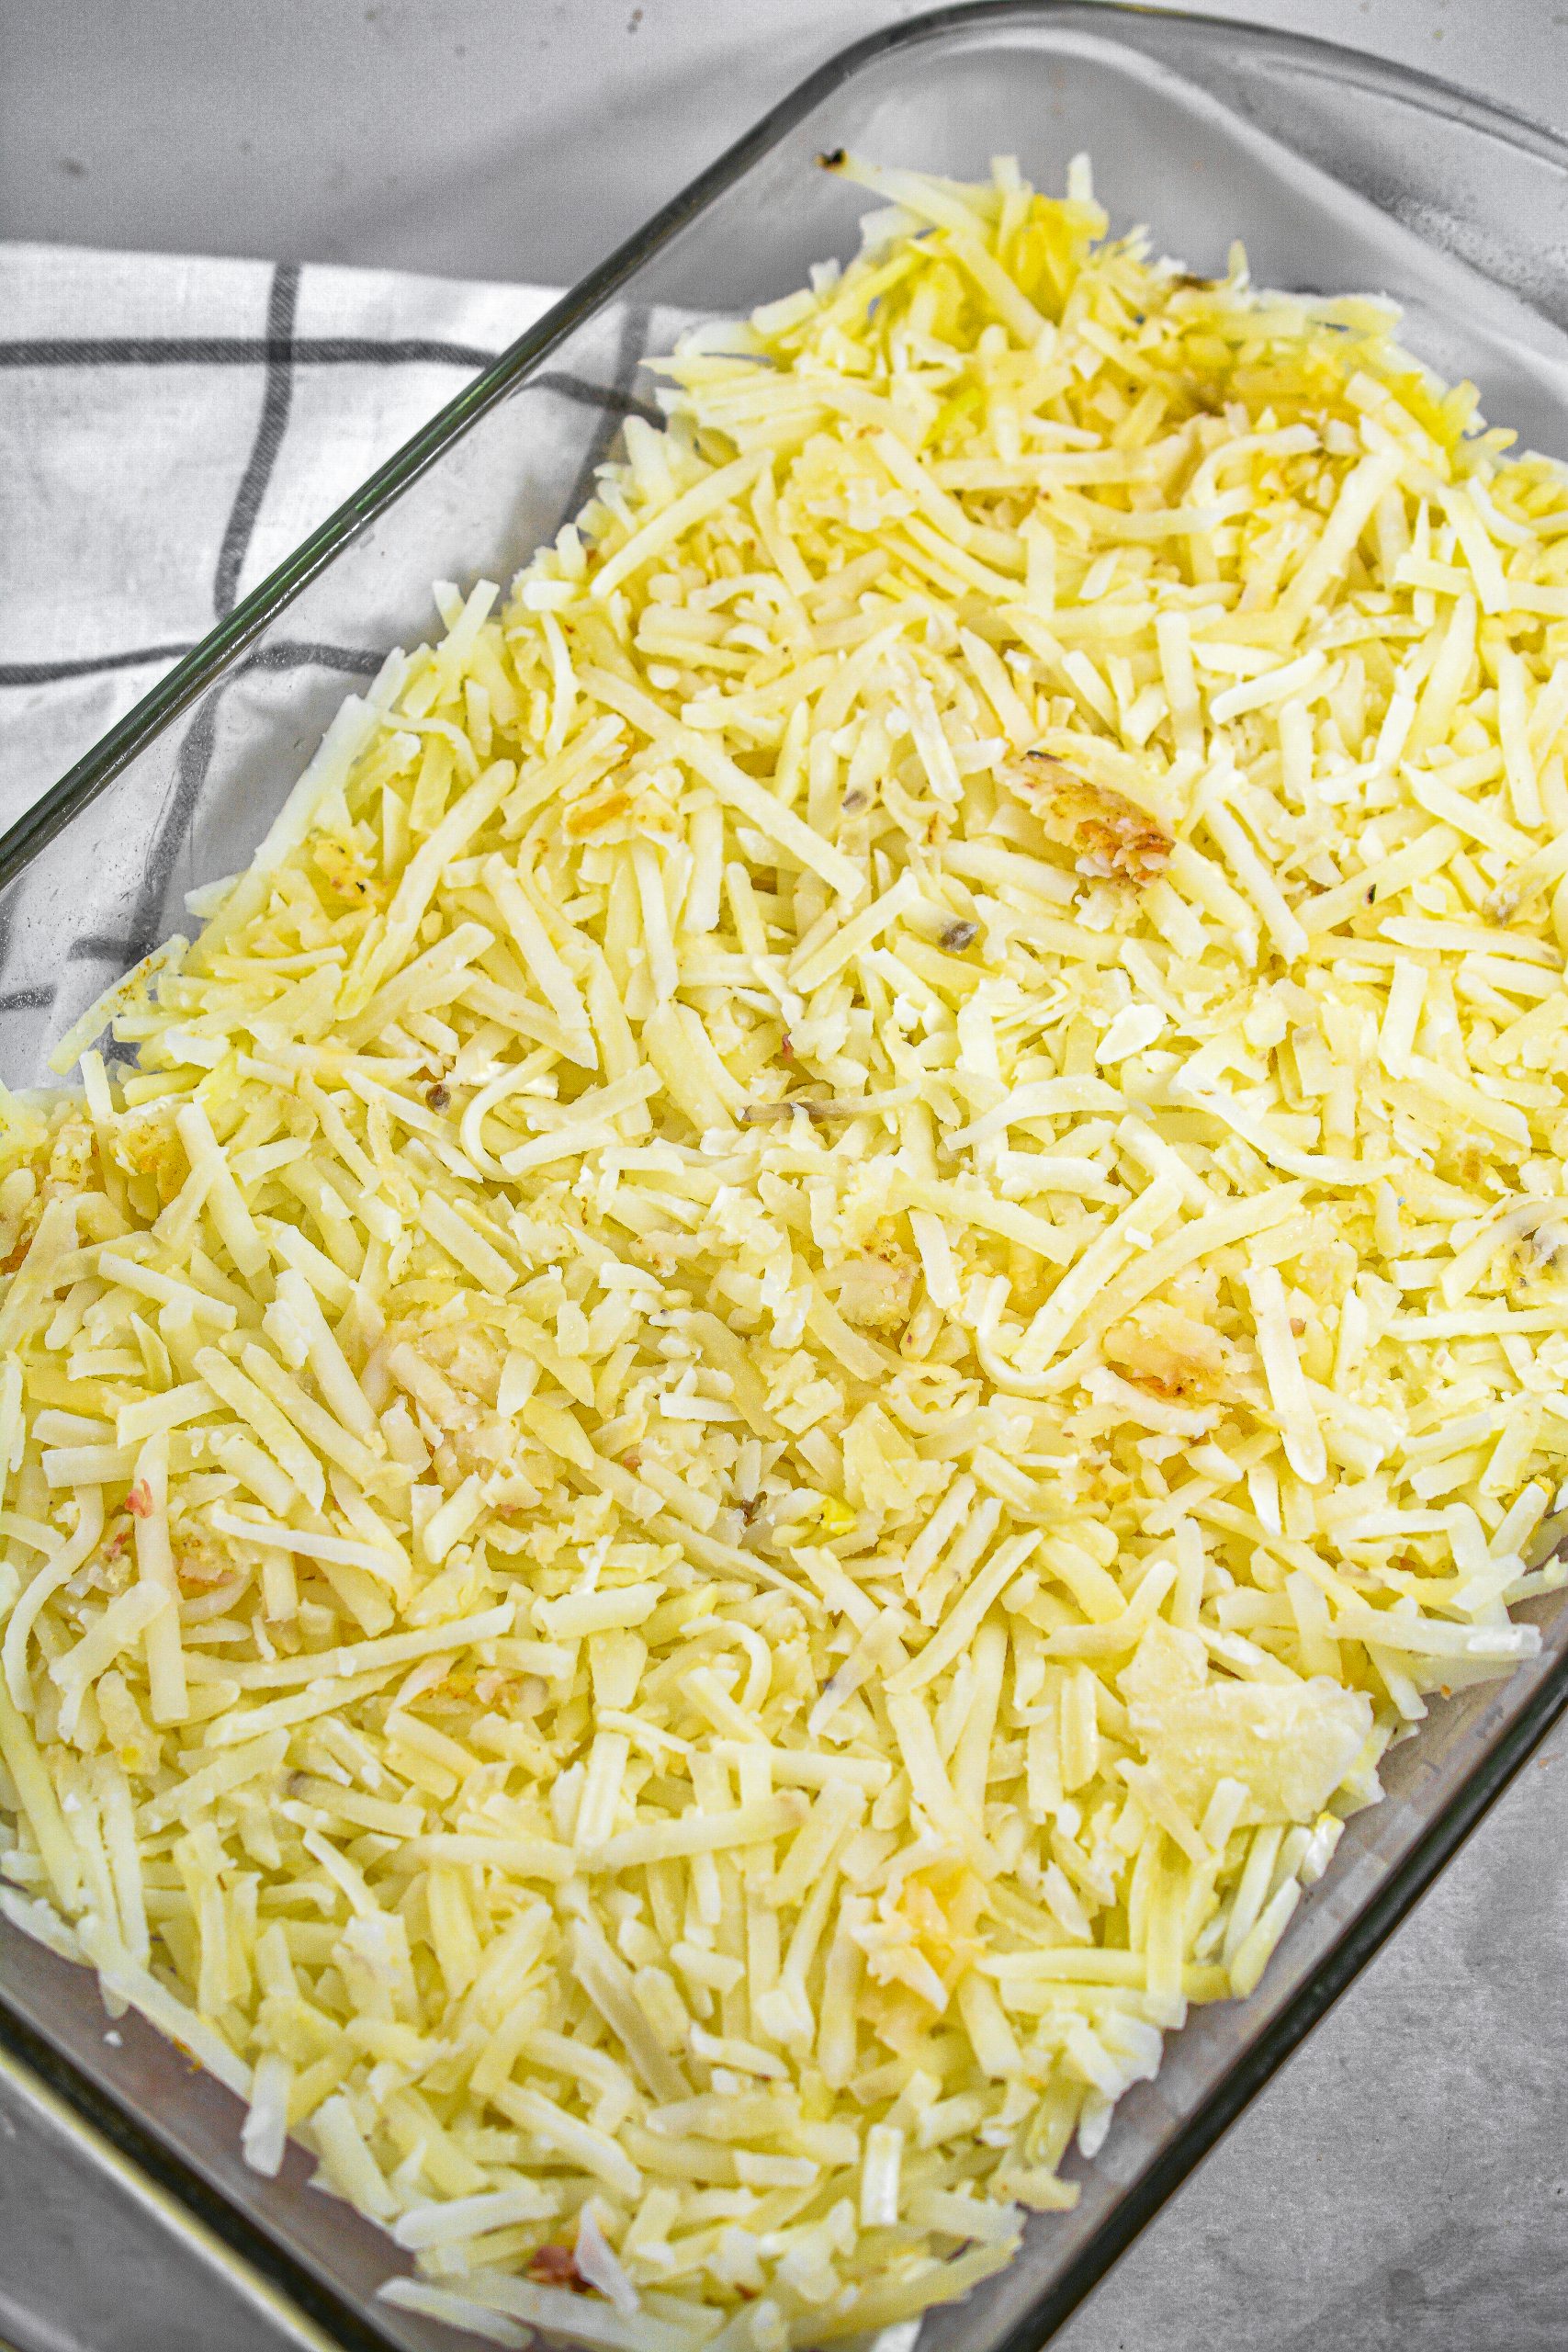 Layer the hashbrowns in the bottom of a well-greased 9x13 baking dish.